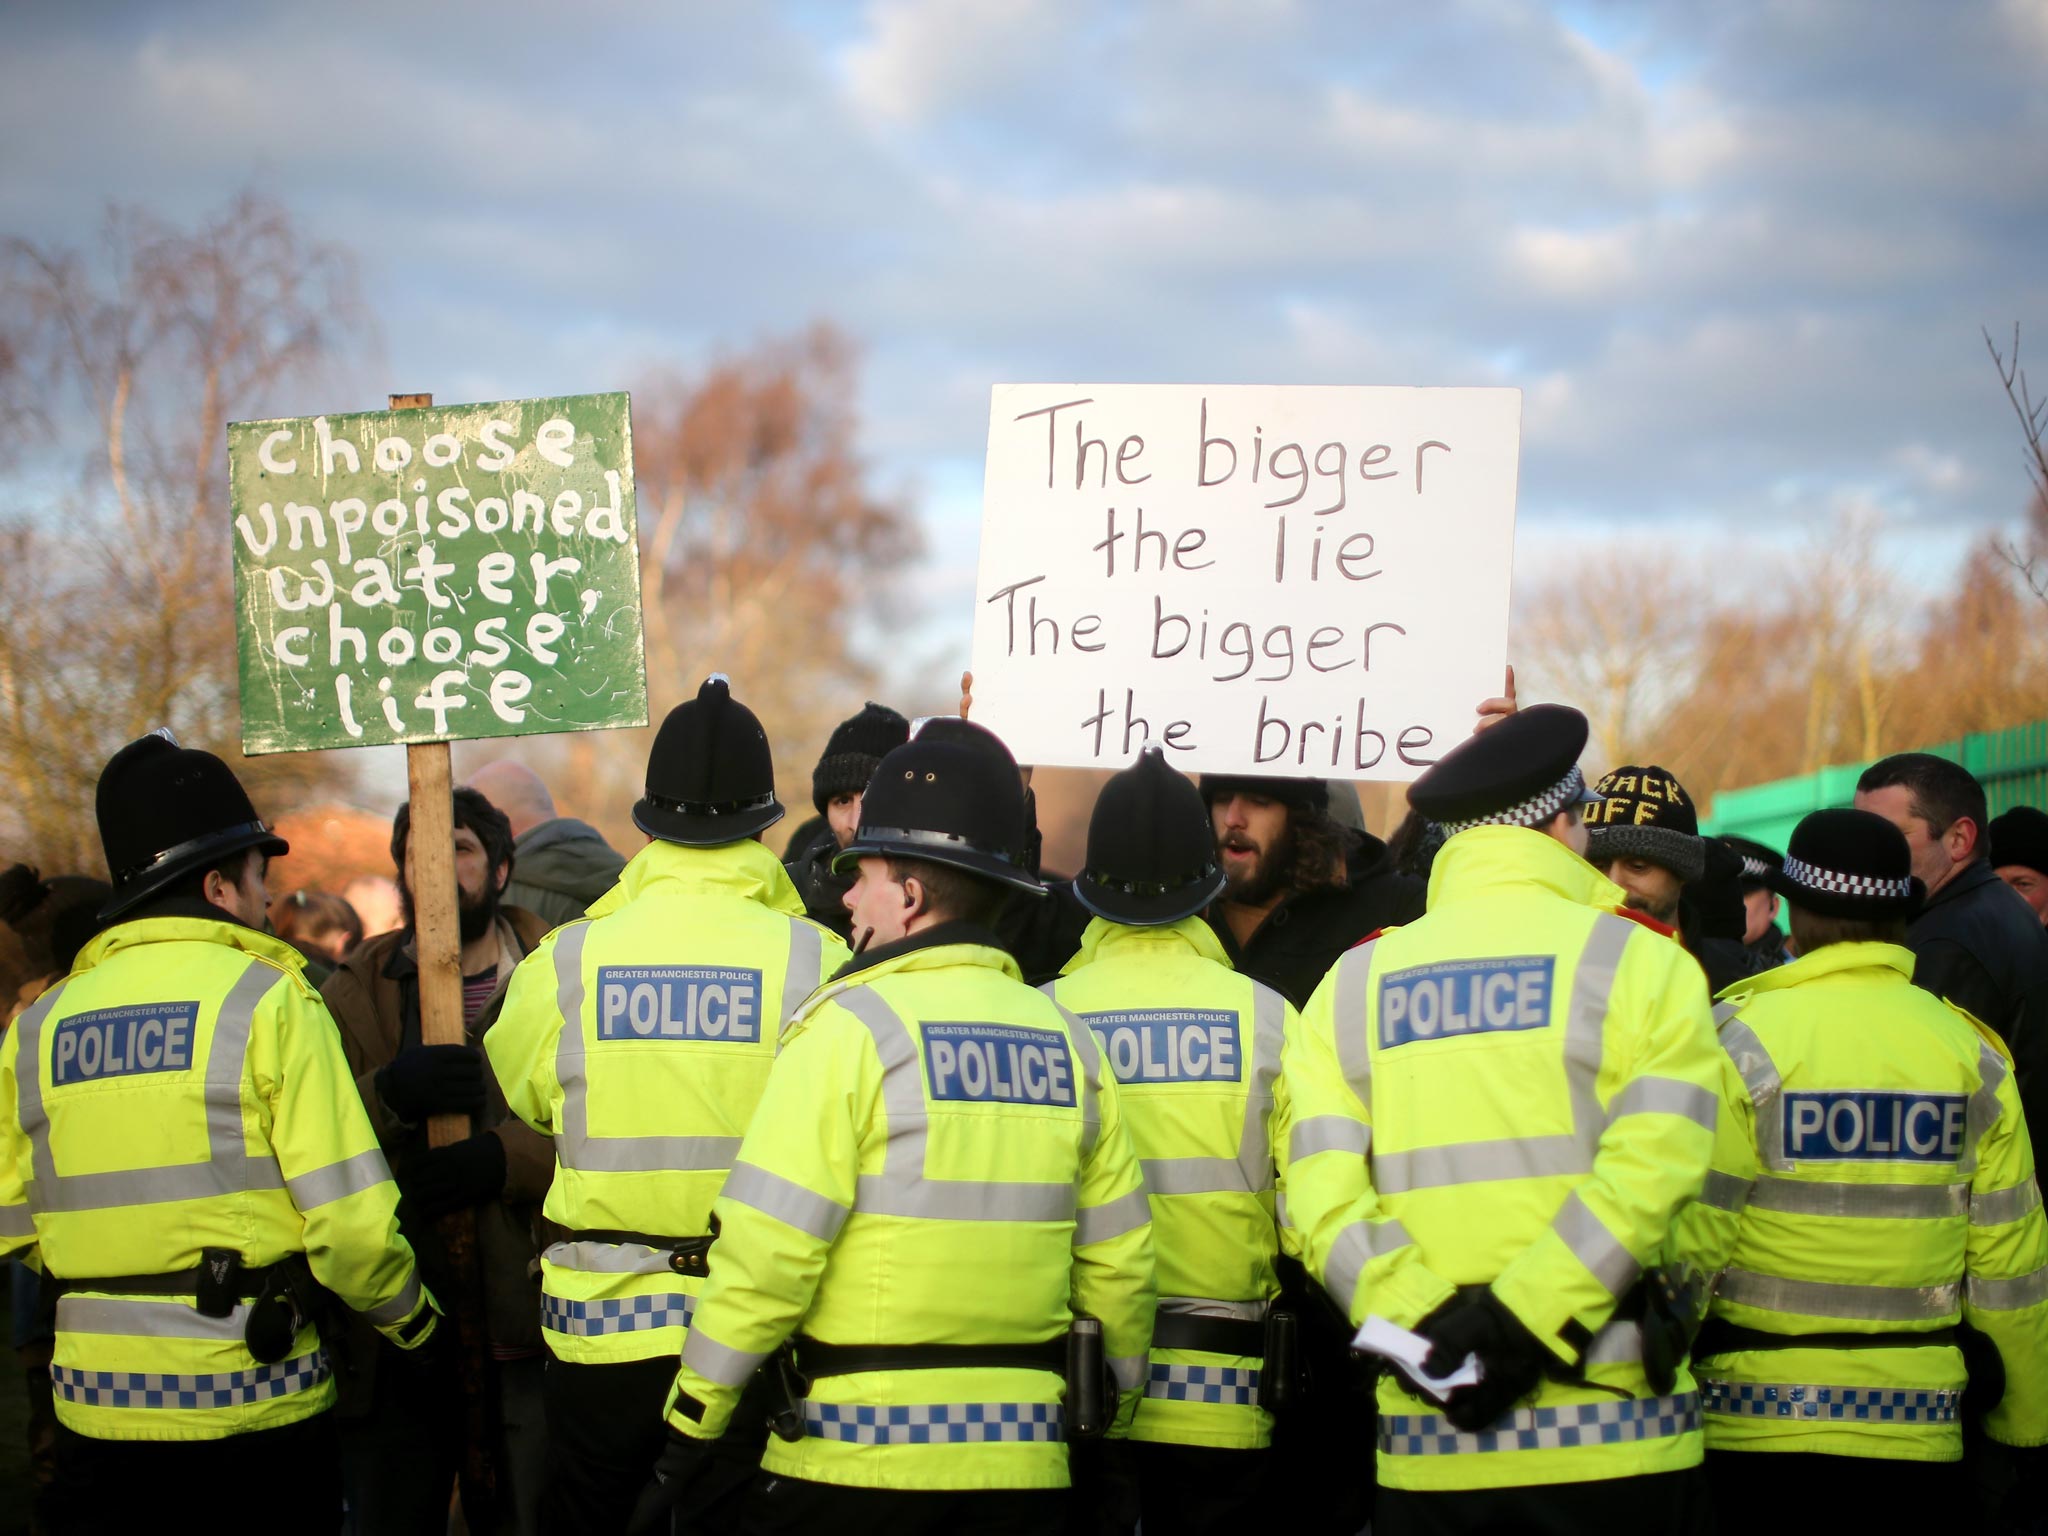 Despite protests George Osborne says that the UK should press ahead with fracking